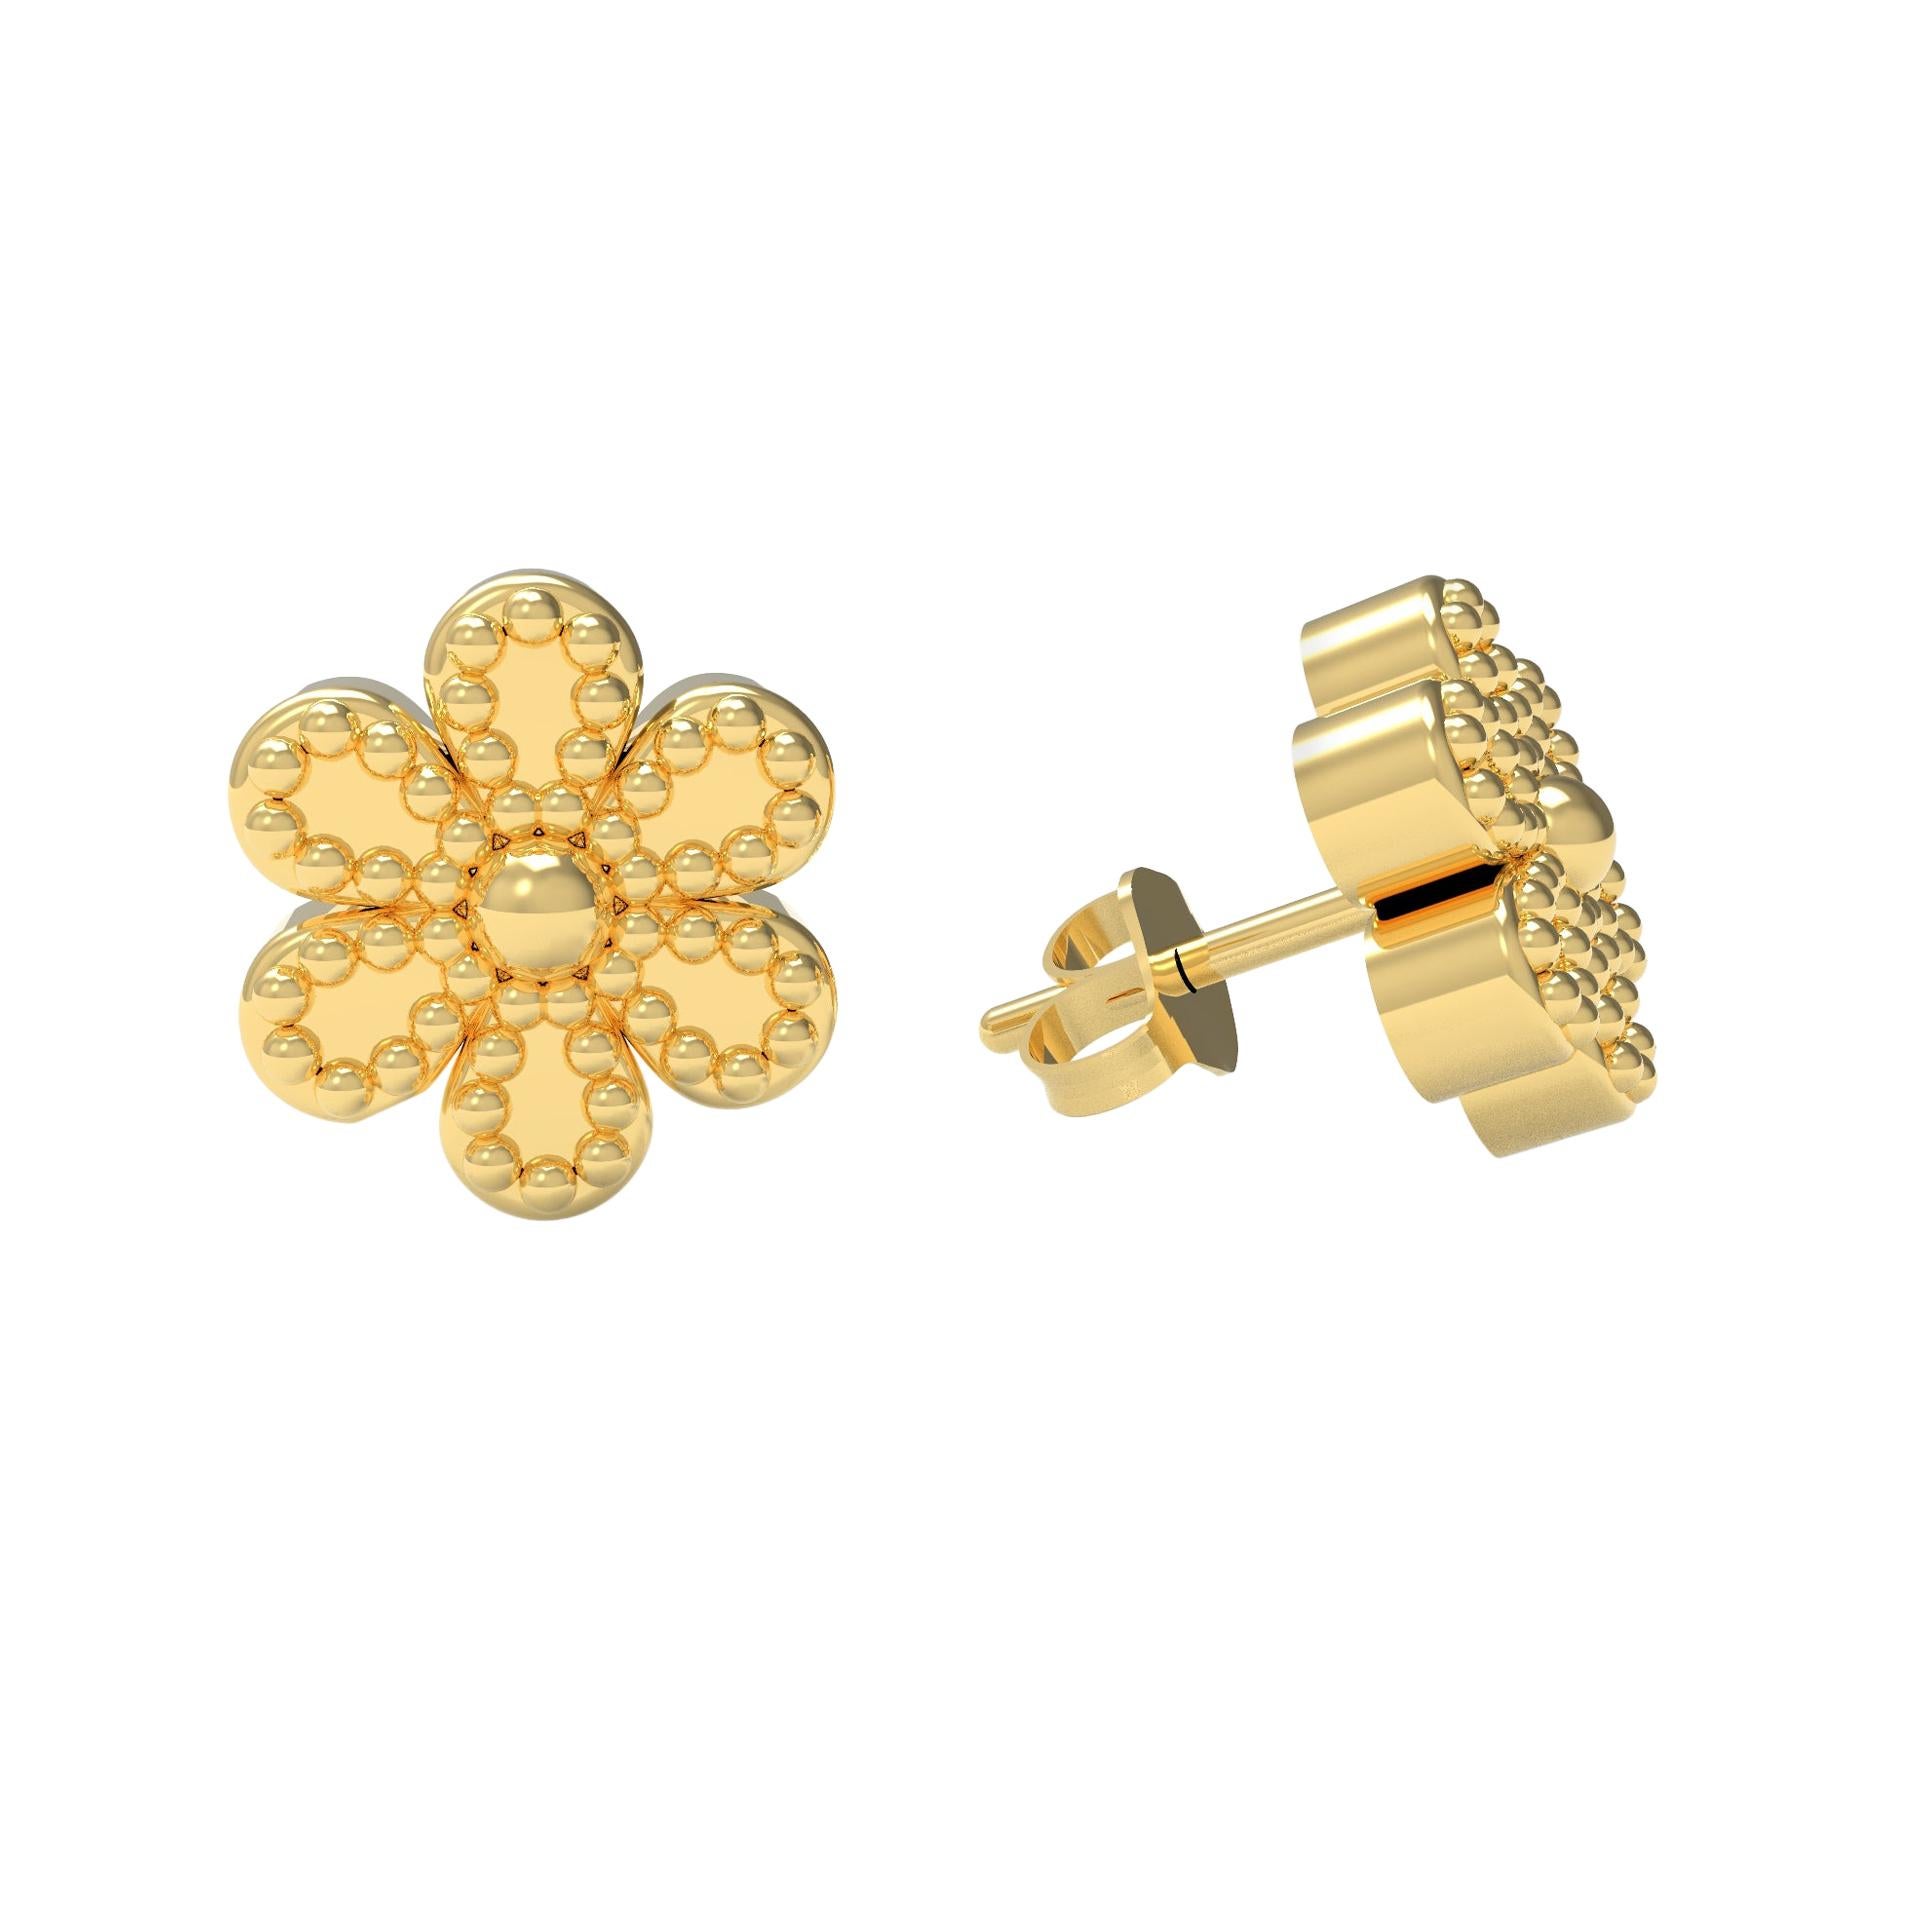 22 Karat Gold Rosette Earrings by Romae Jewelry Inspired by Ancient Designs